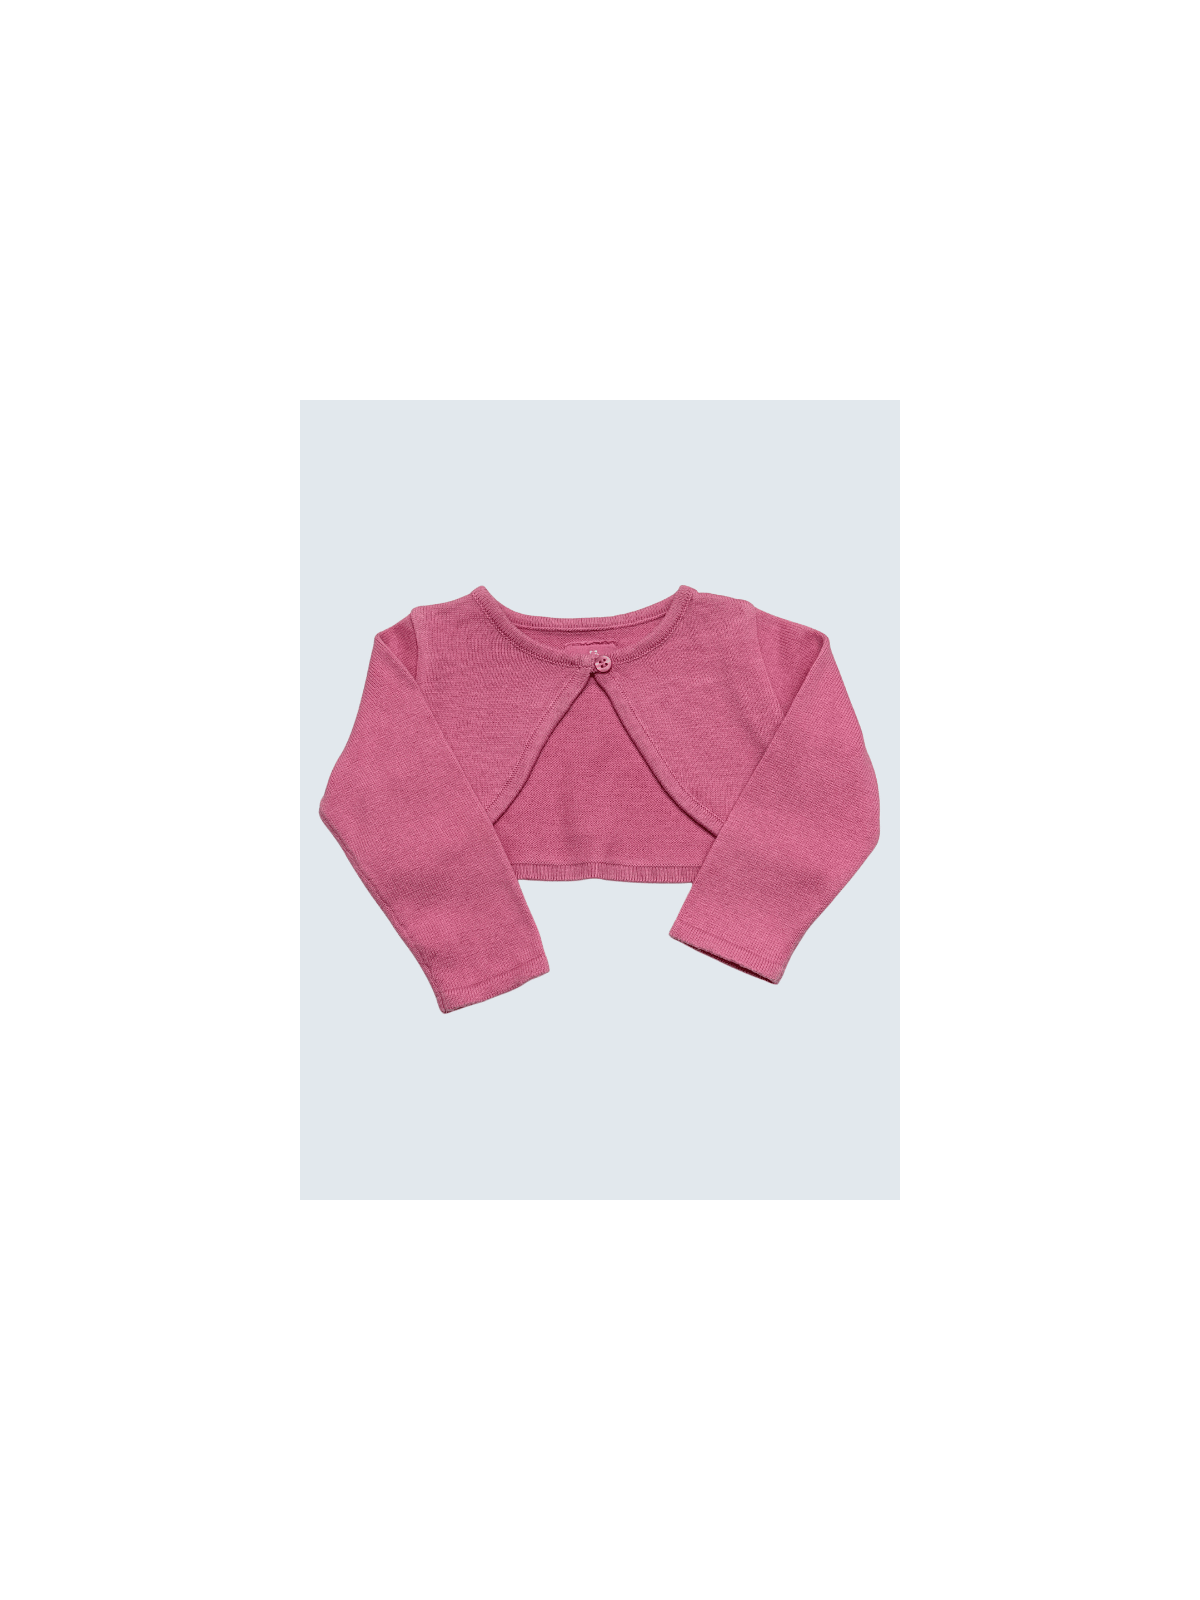 Gilet d'occasion Early Days 6/9 Mois pour fille.